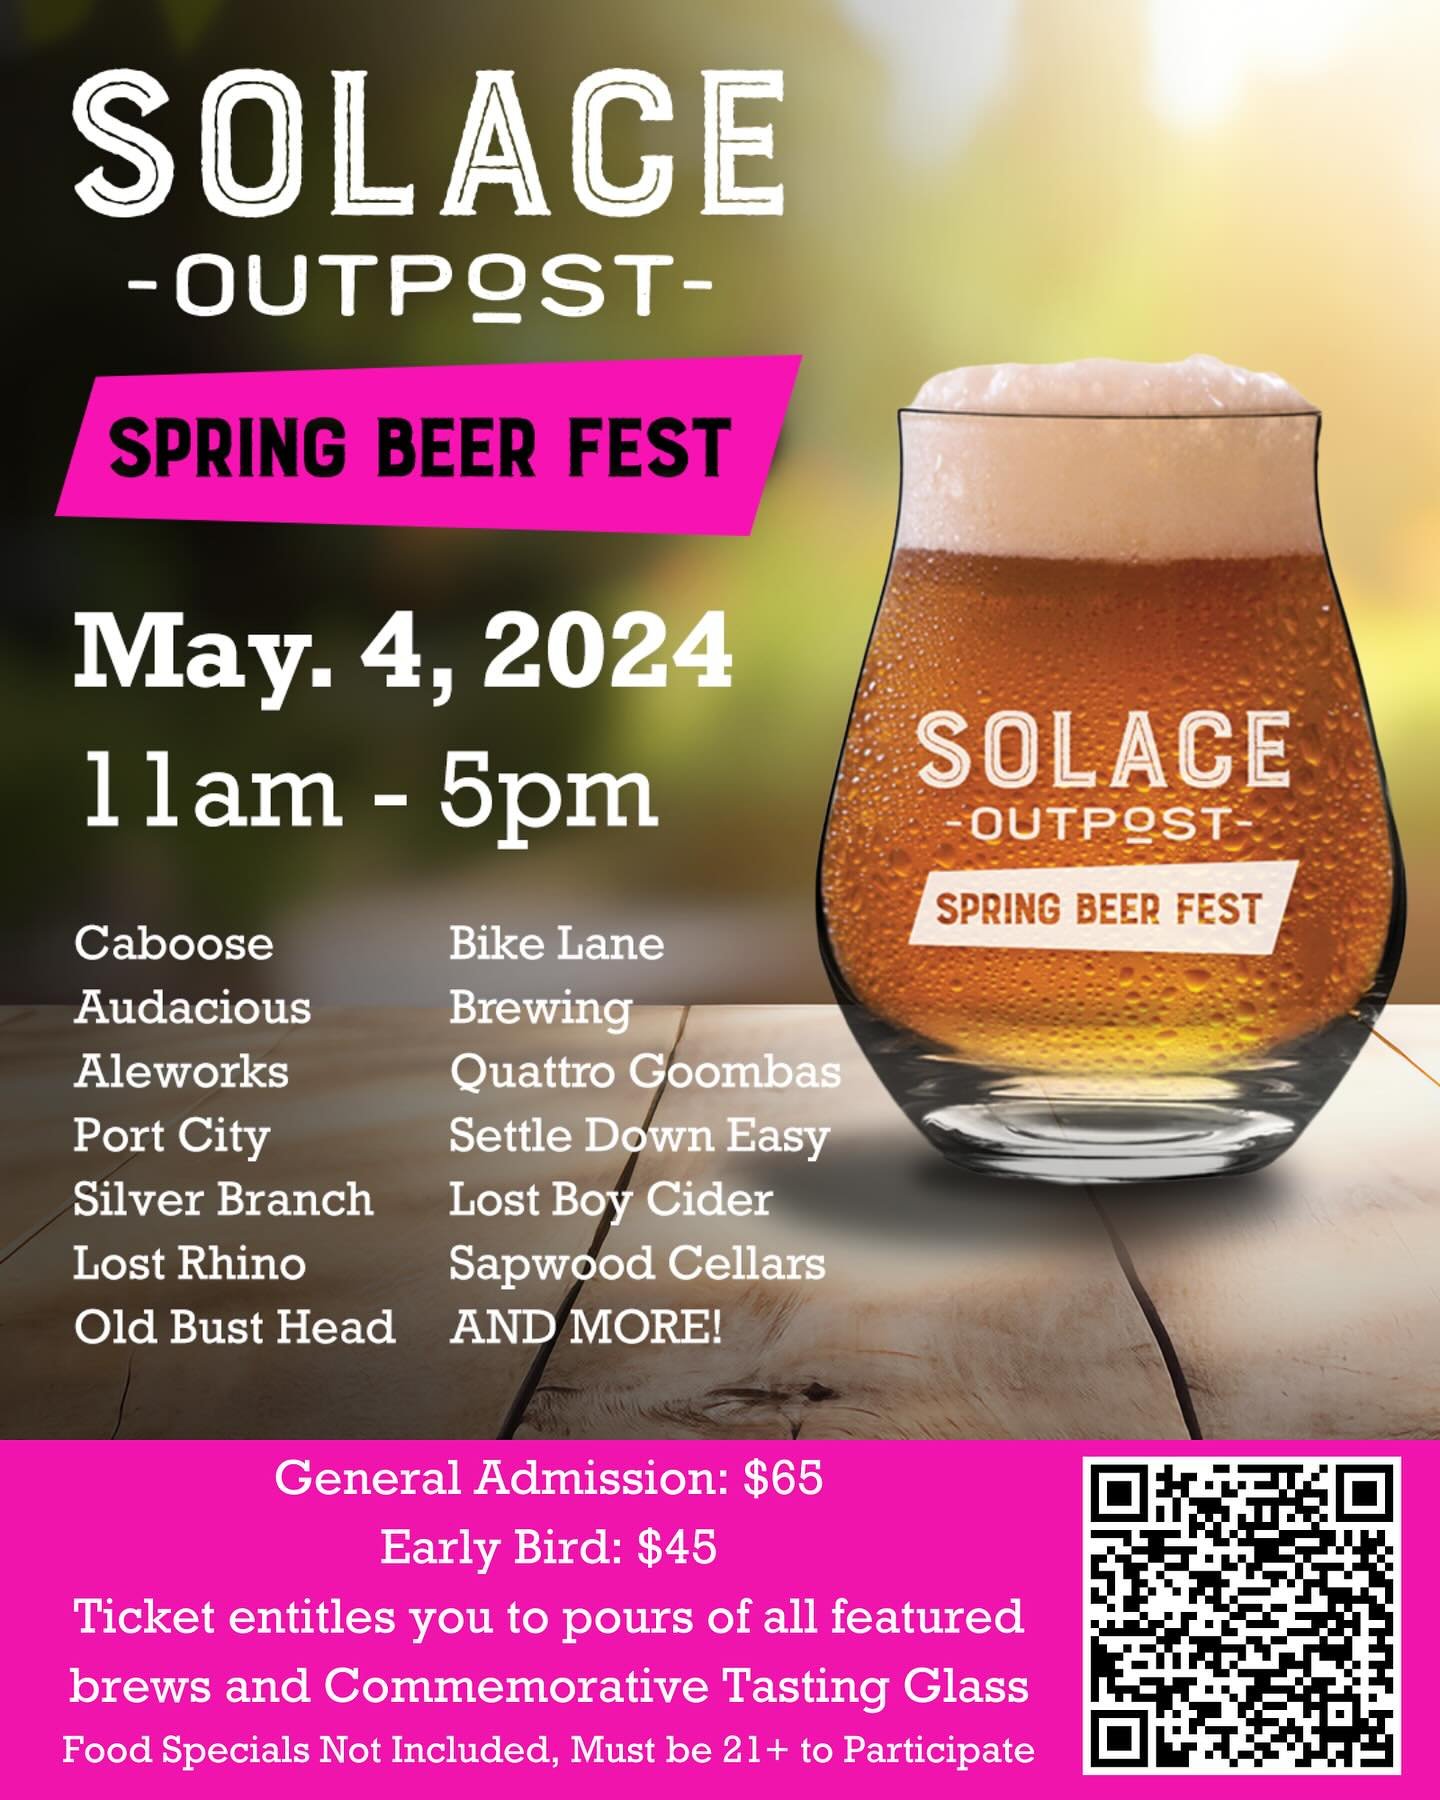 Out of the cave again next weekend pouring @solaceoutpost Spring Beer Fest. Should be a great time!